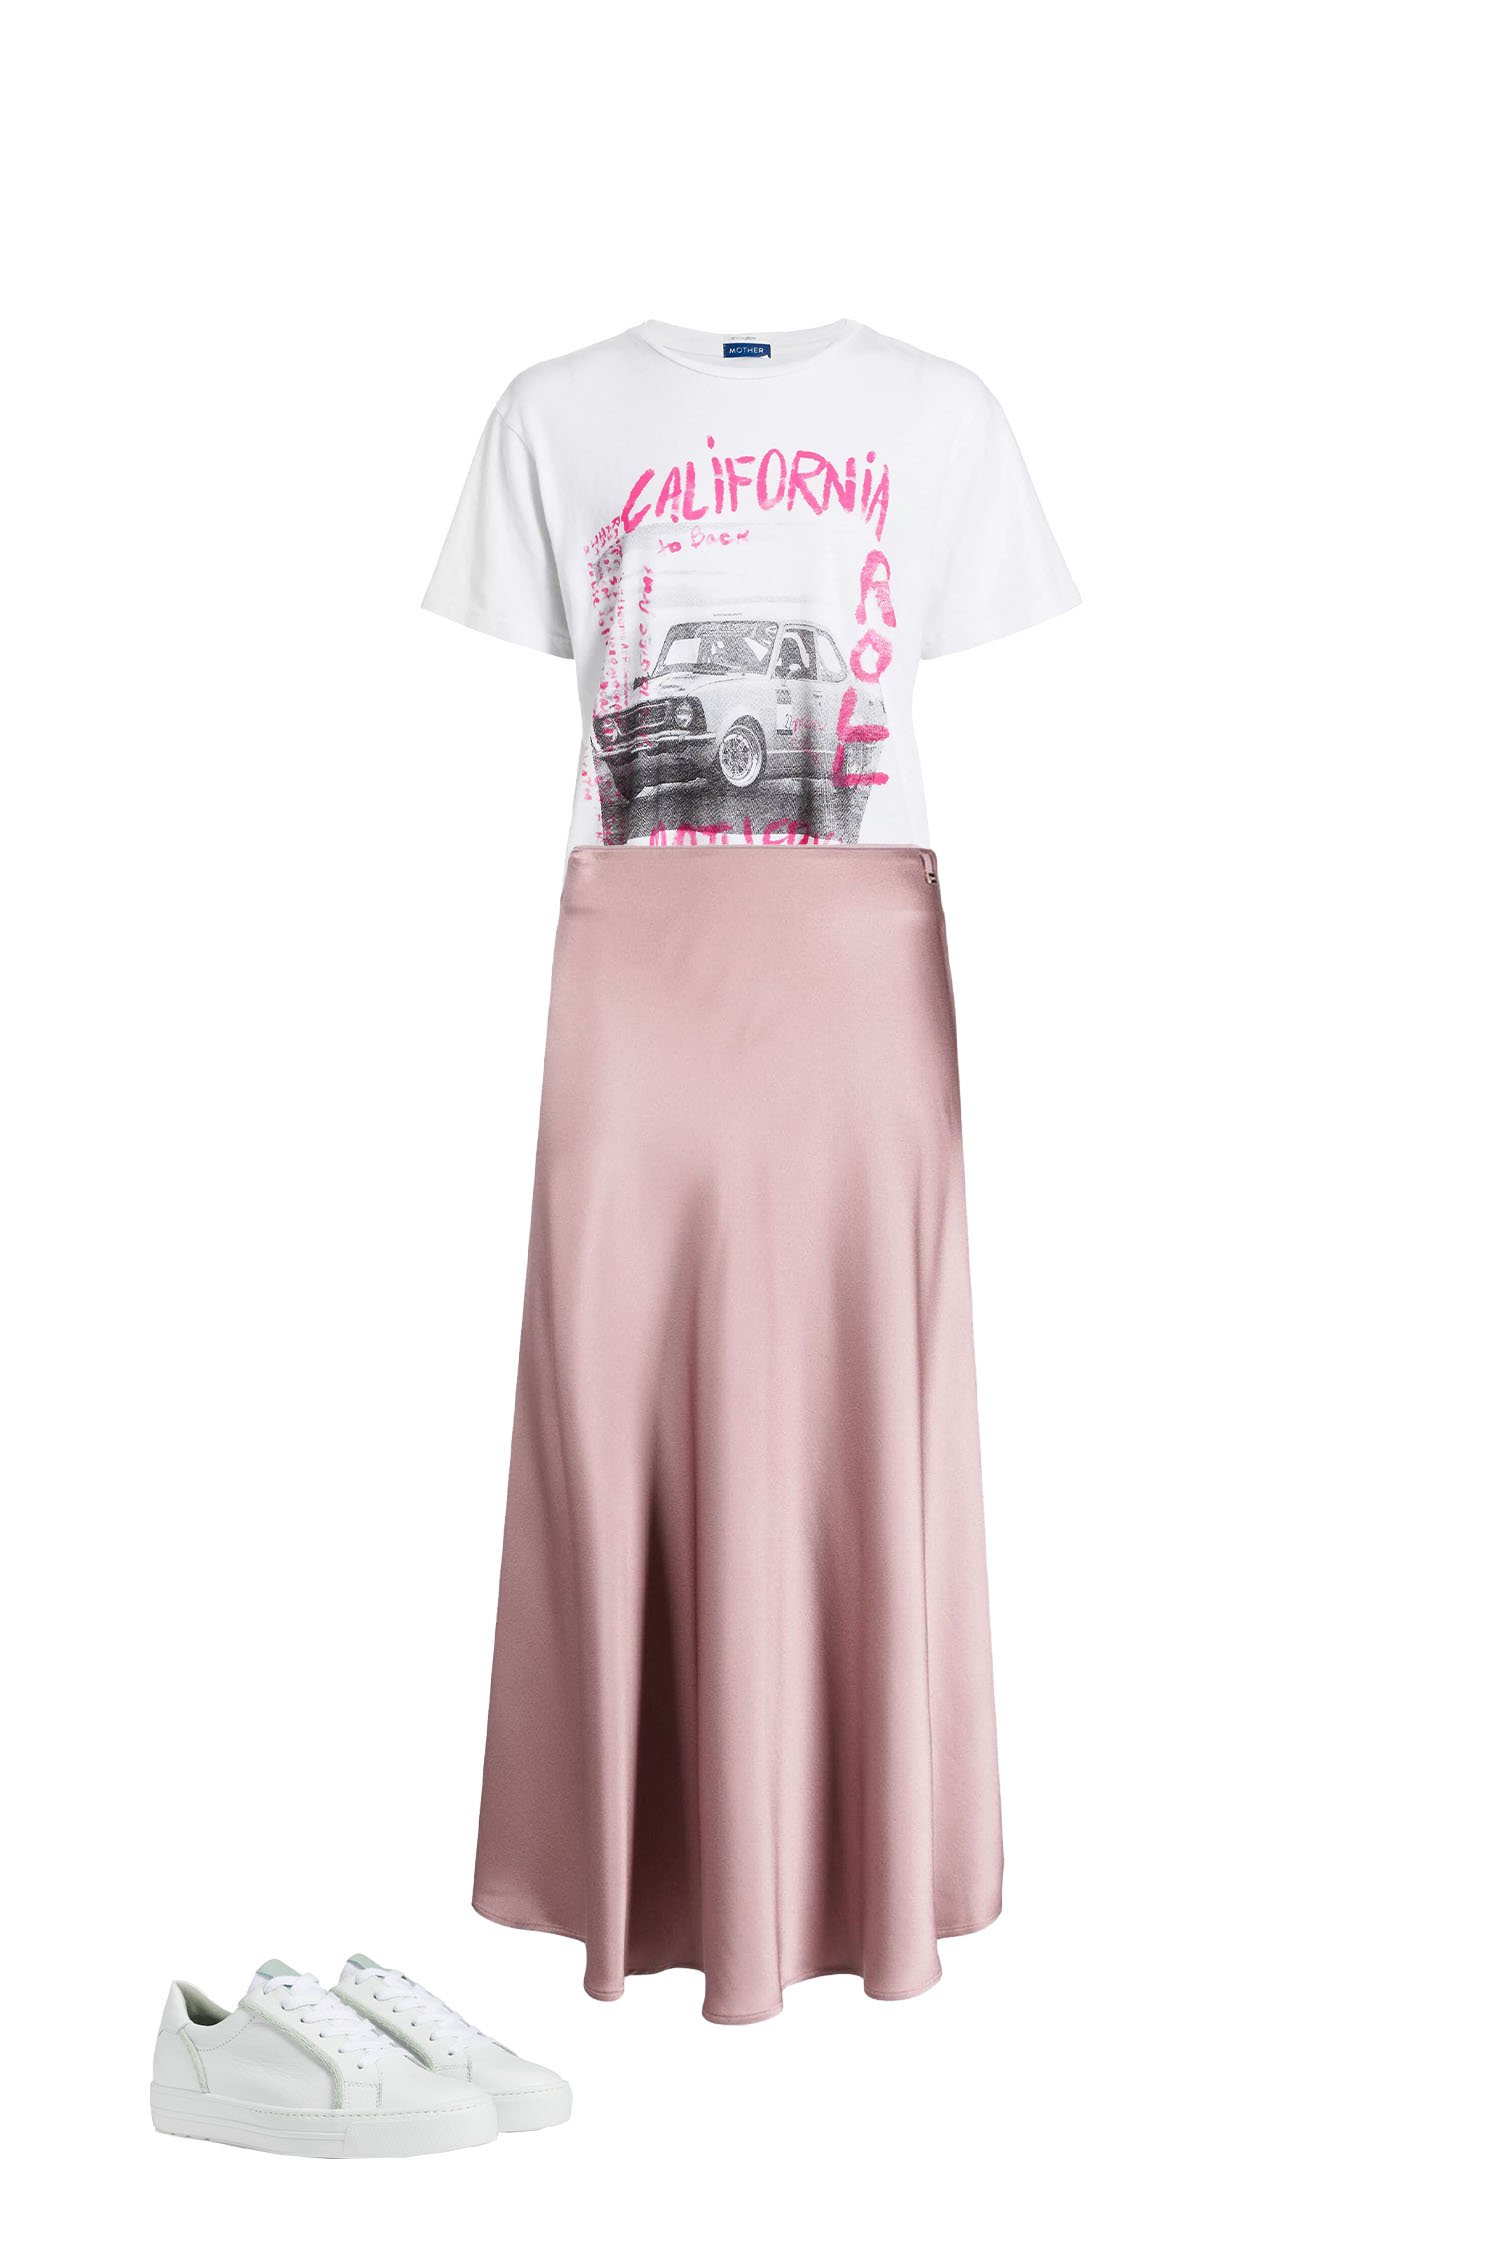 Dusky Rose Pink Satin Skirt with White Graphic T-shirt All White Sneaker